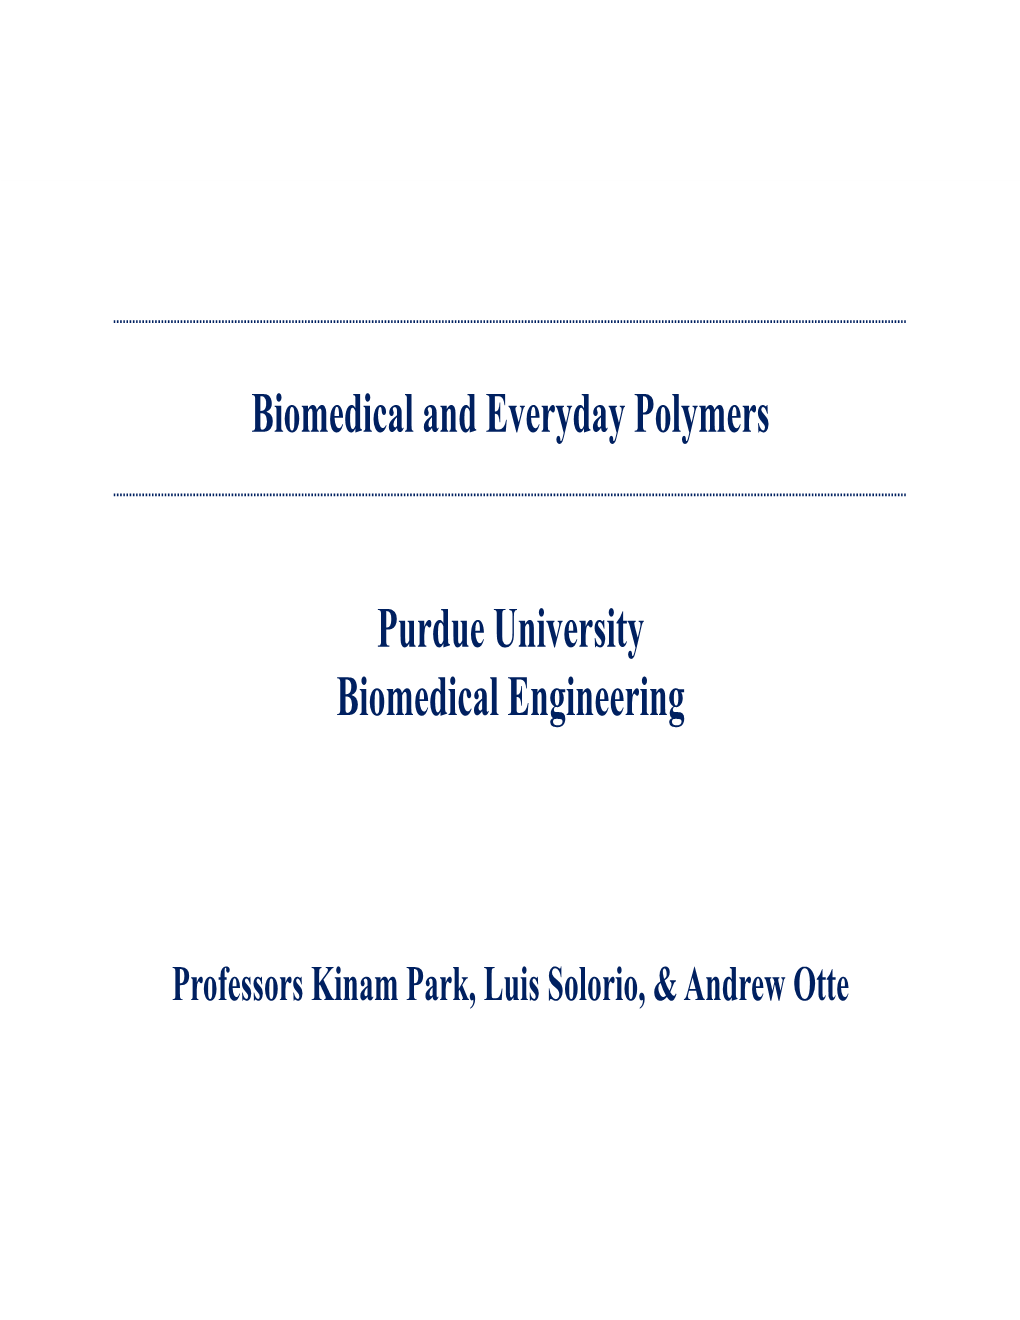 2 History of Polymers.Pdf